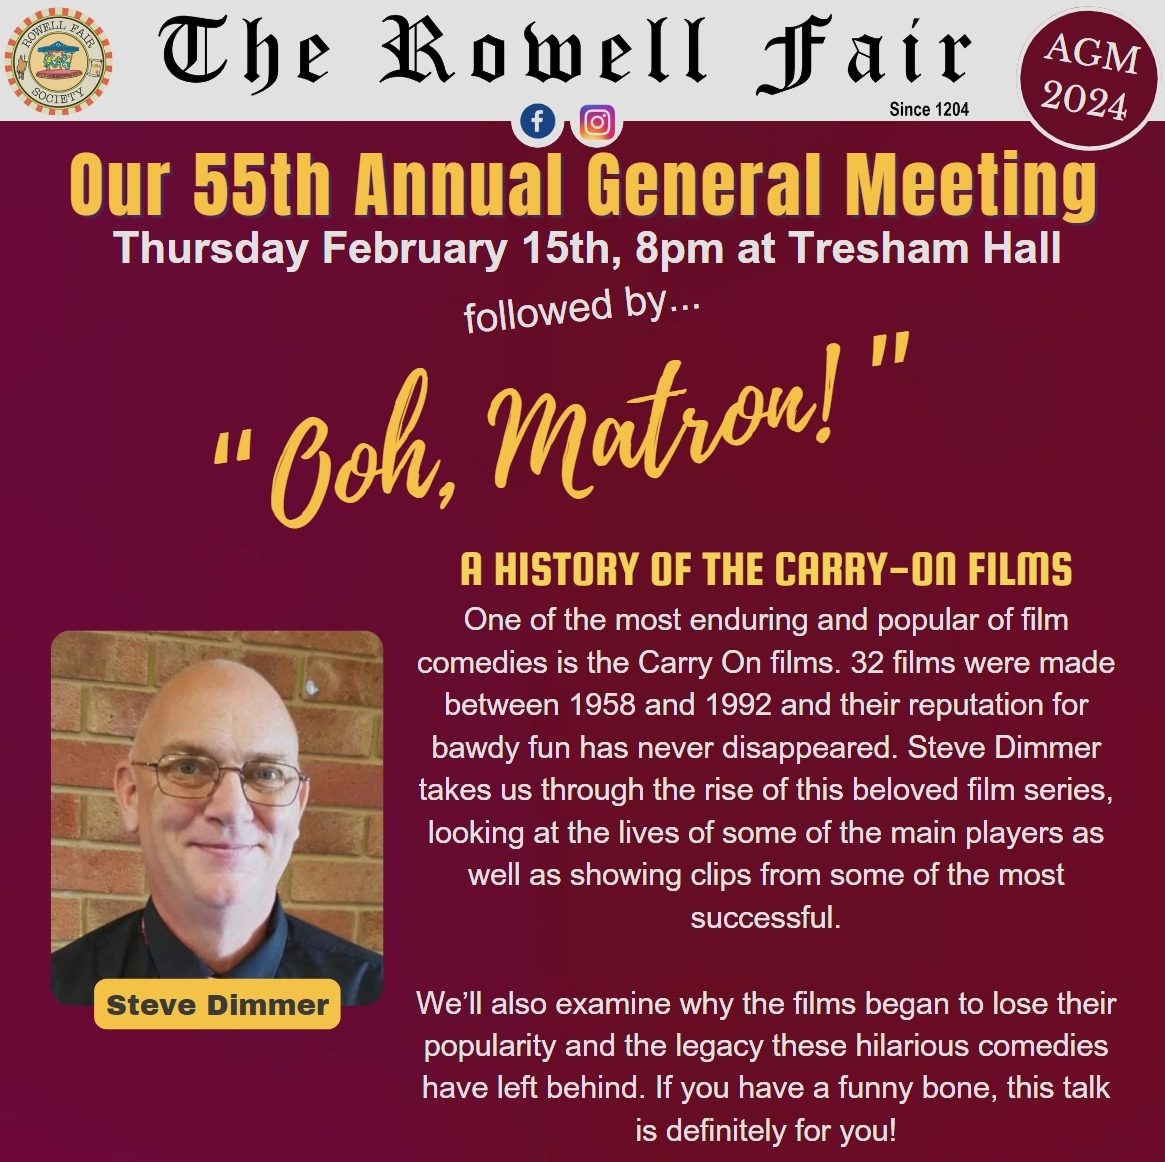 You are currently viewing Rowell Fair Society’s AGM 2024